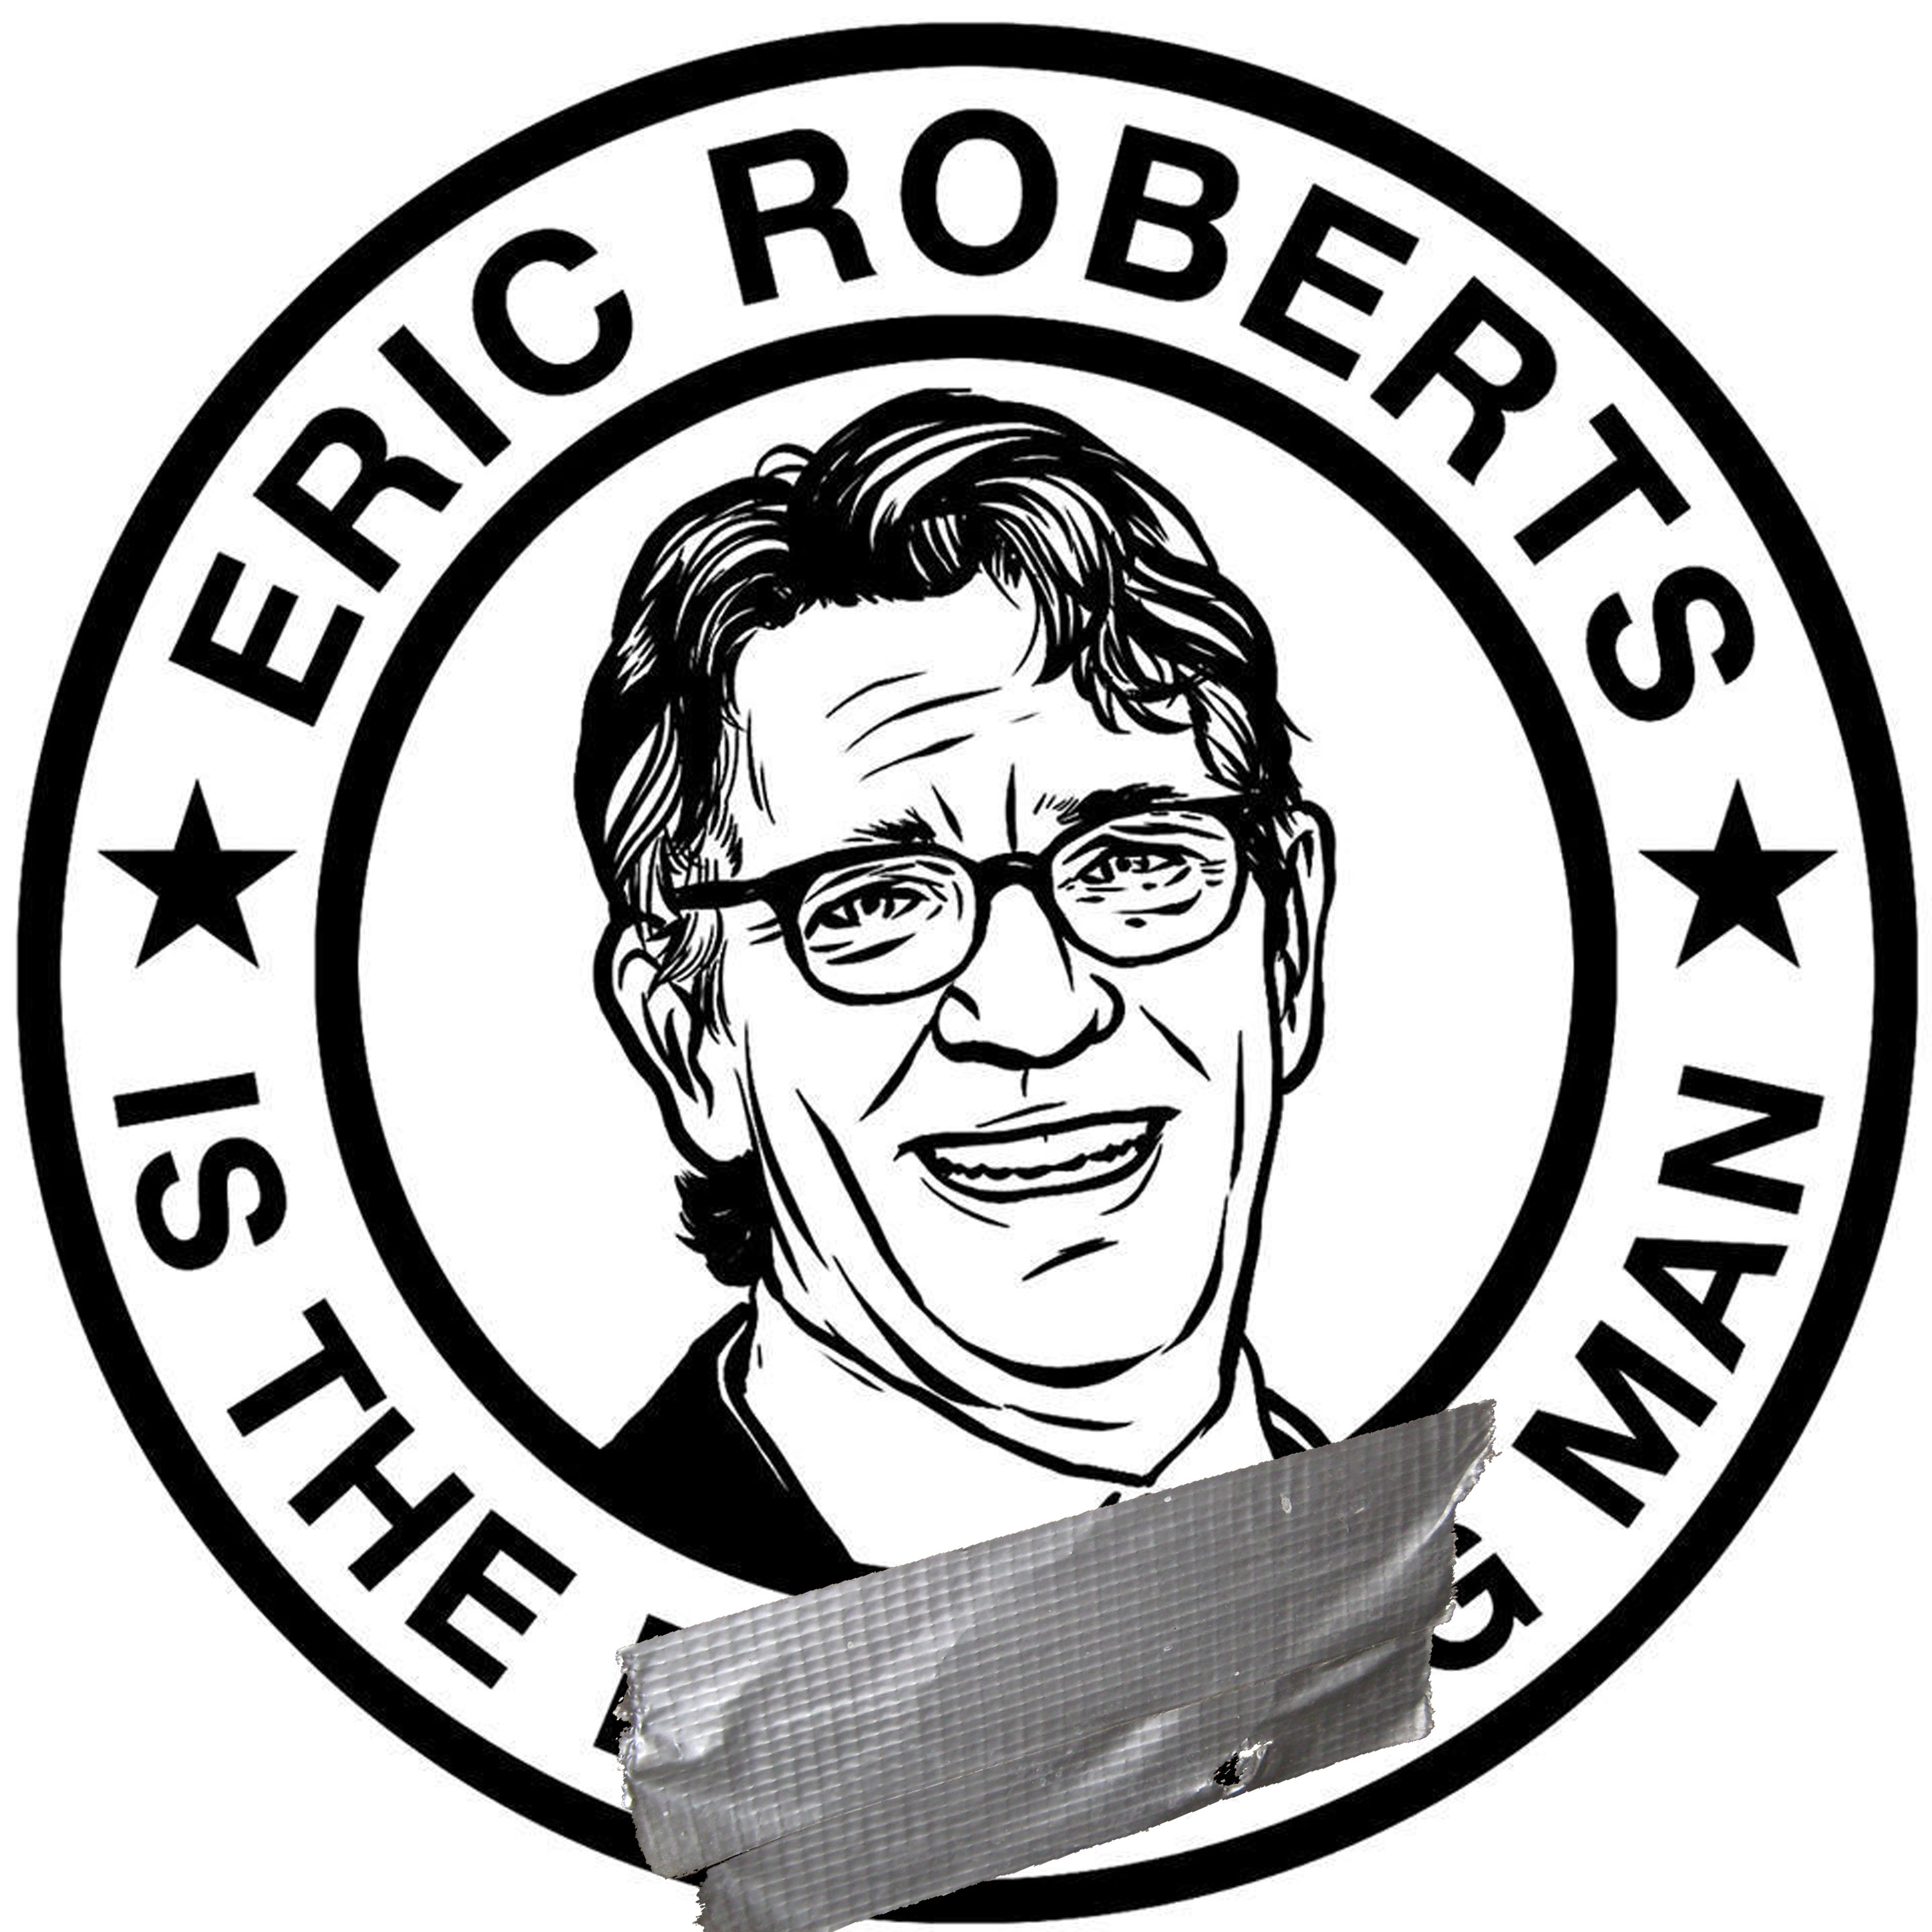 Eric Roberts is the Man